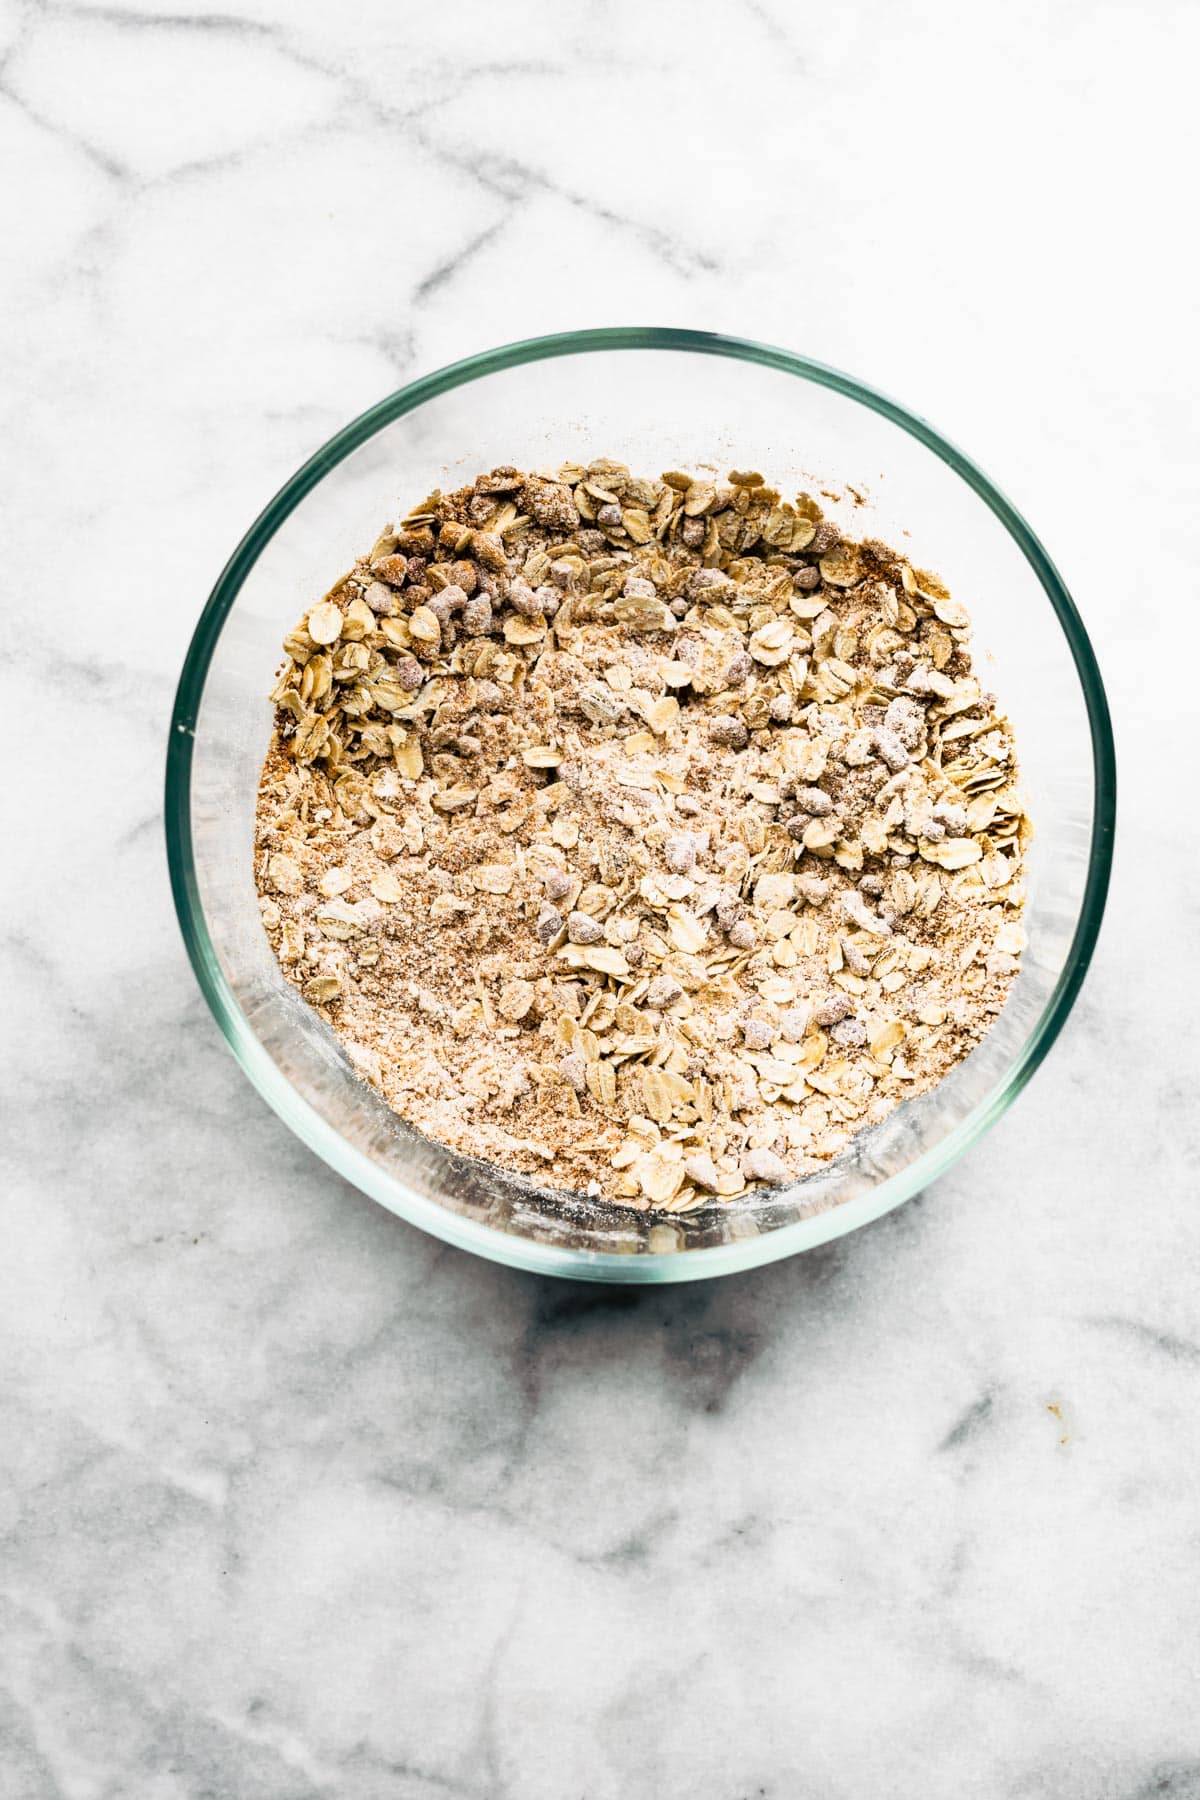 A glass bowl of gluten free oats, flour and spices.